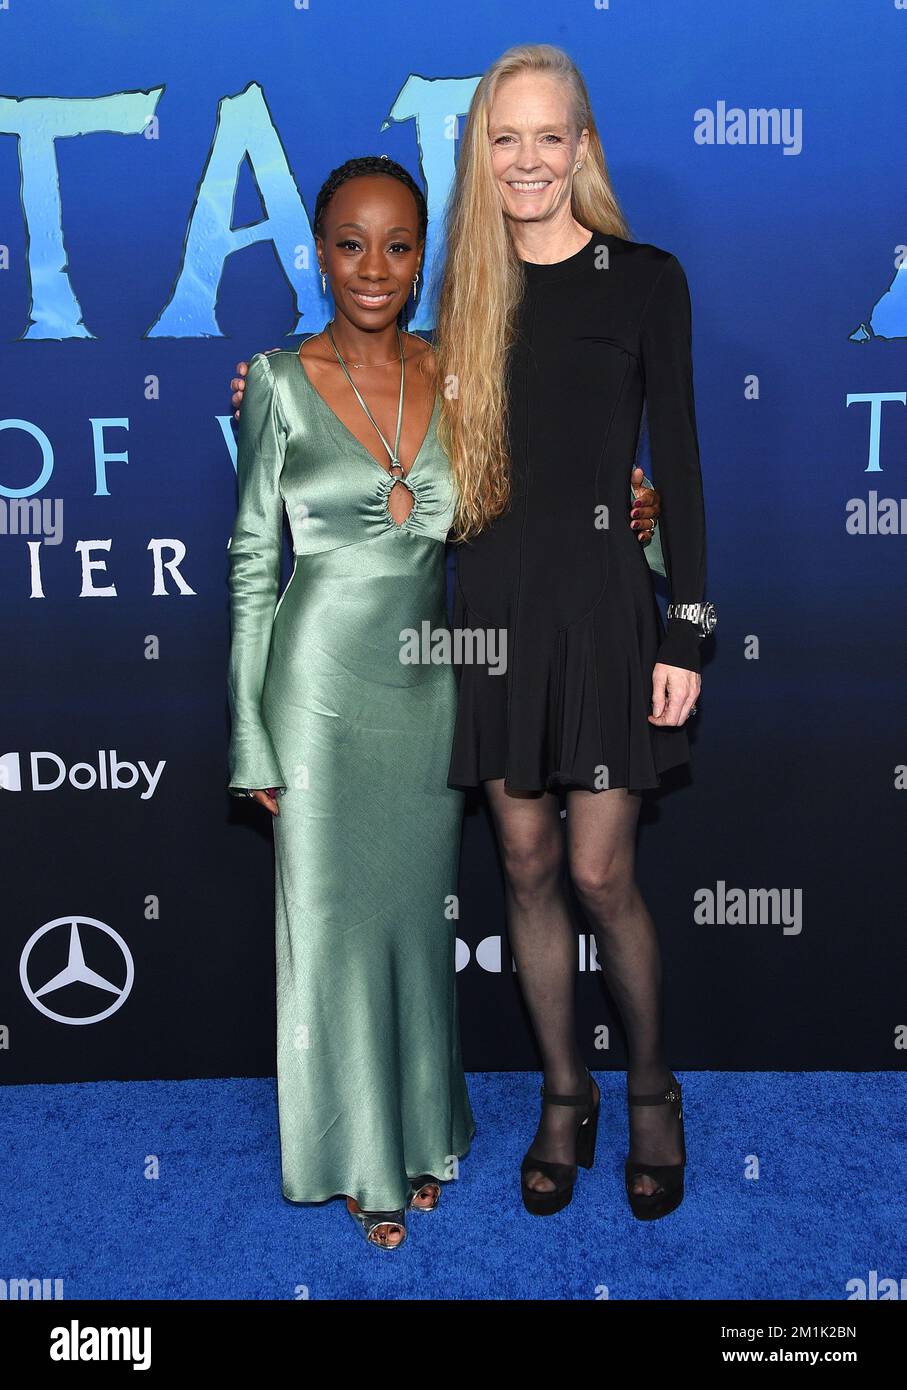 Hollywood, CA on December 12, 2022. Suzy Amis and Samata Pattinson arriving to the U.S. premiere of 20th Century Studios’ “Avatar: The Way of Water”   held at the Dolby Theatre in Hollywood, CA on December 12, 2022. © Lisa OConnor / AFF-USA.com Stock Photo